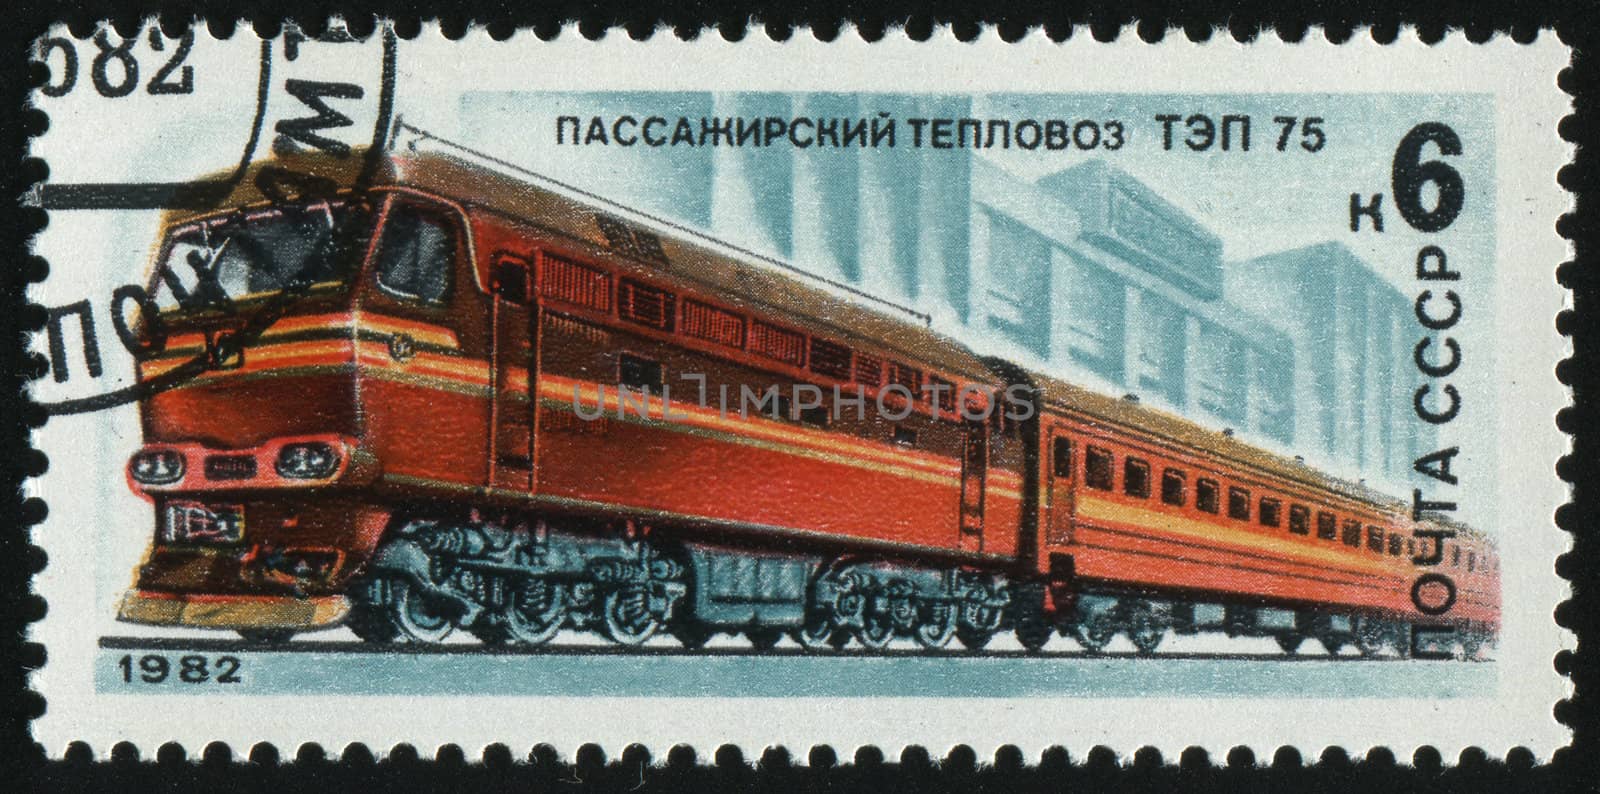 RUSSIA - CIRCA 1982: stamp printed by Russia, shows Electric Locomotive, circa 1982.